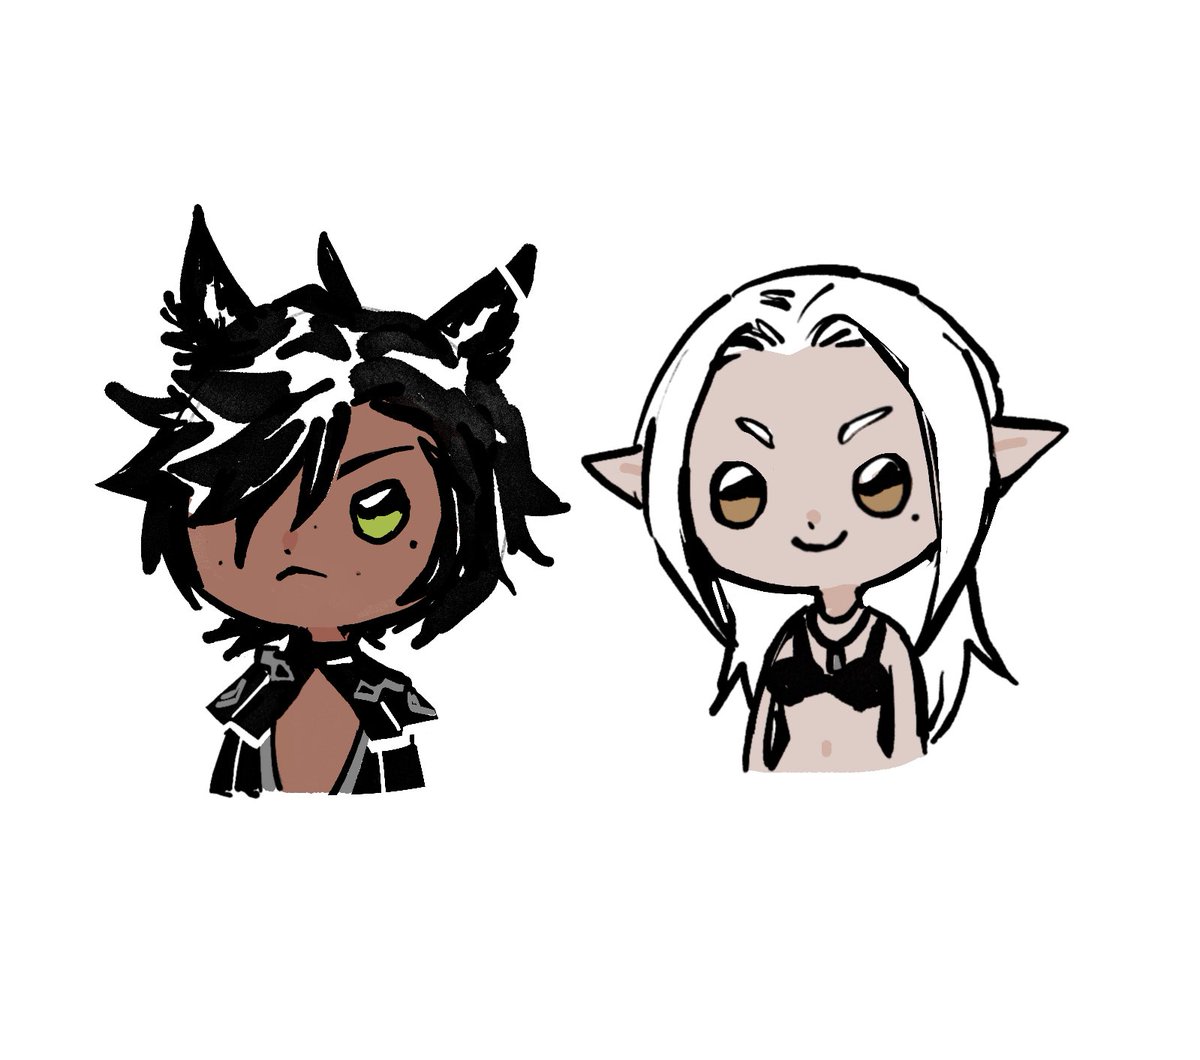 Send your WoLs and I’ll doodle them Take a look at my two idiots